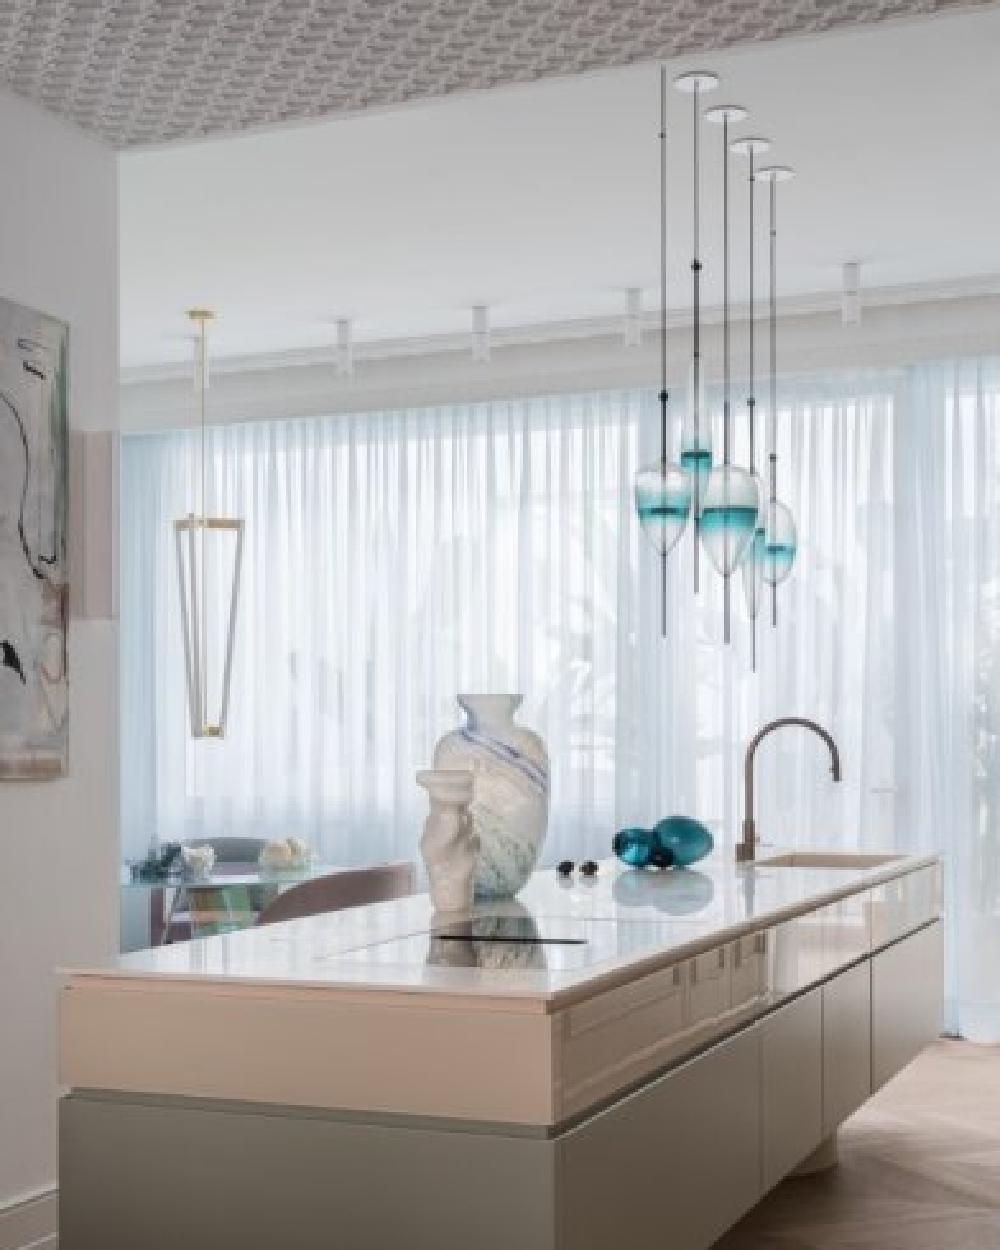 FLOW[T] S3 Pendant lamp in Turquoise by Nao Tamura for Wonderglass For Sale 1